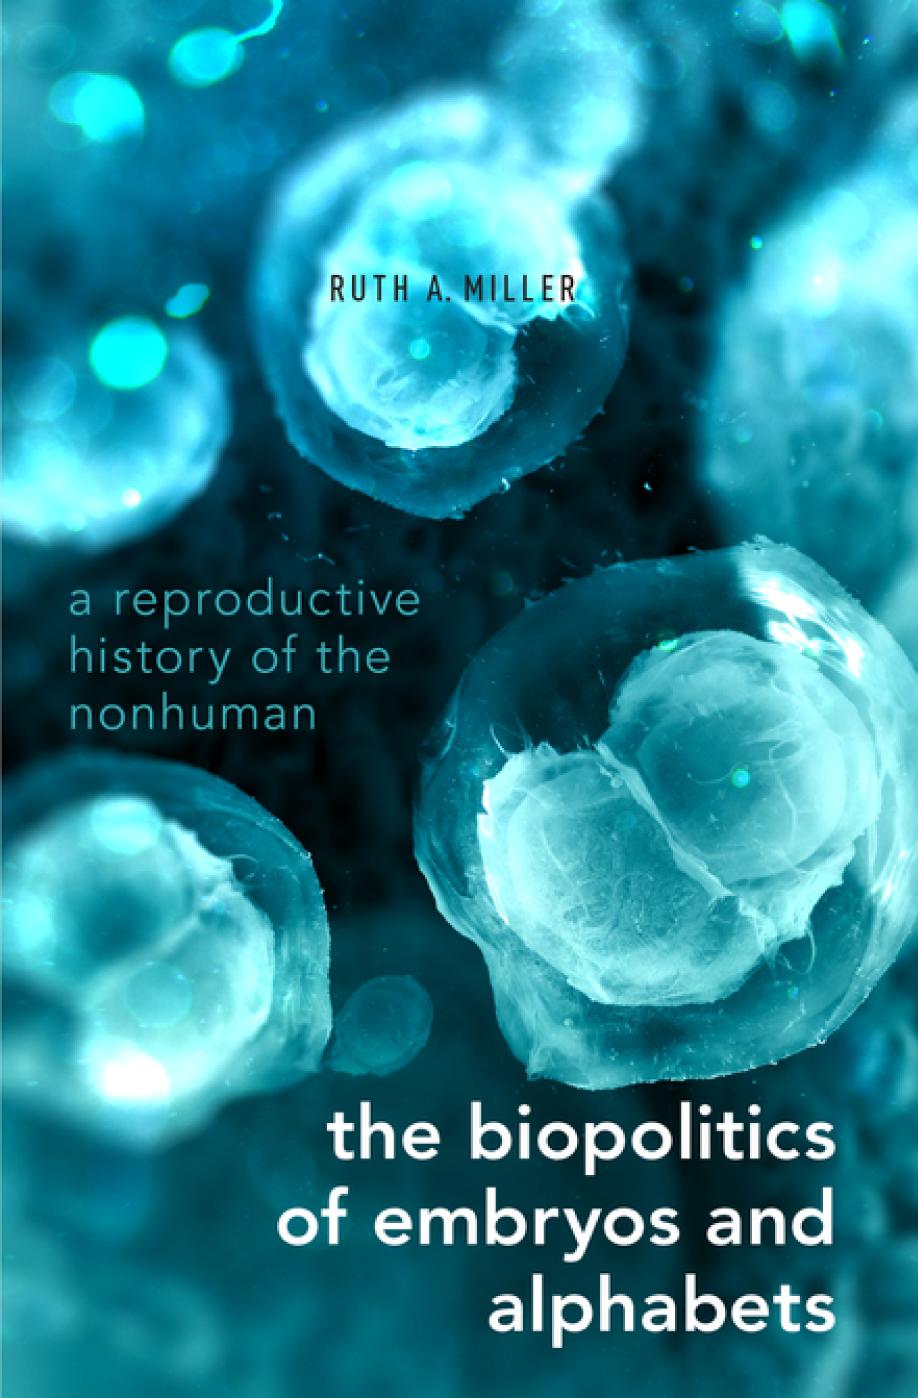 The biopolitics of embryos and alphabets : a reproductive history of the nonhuman